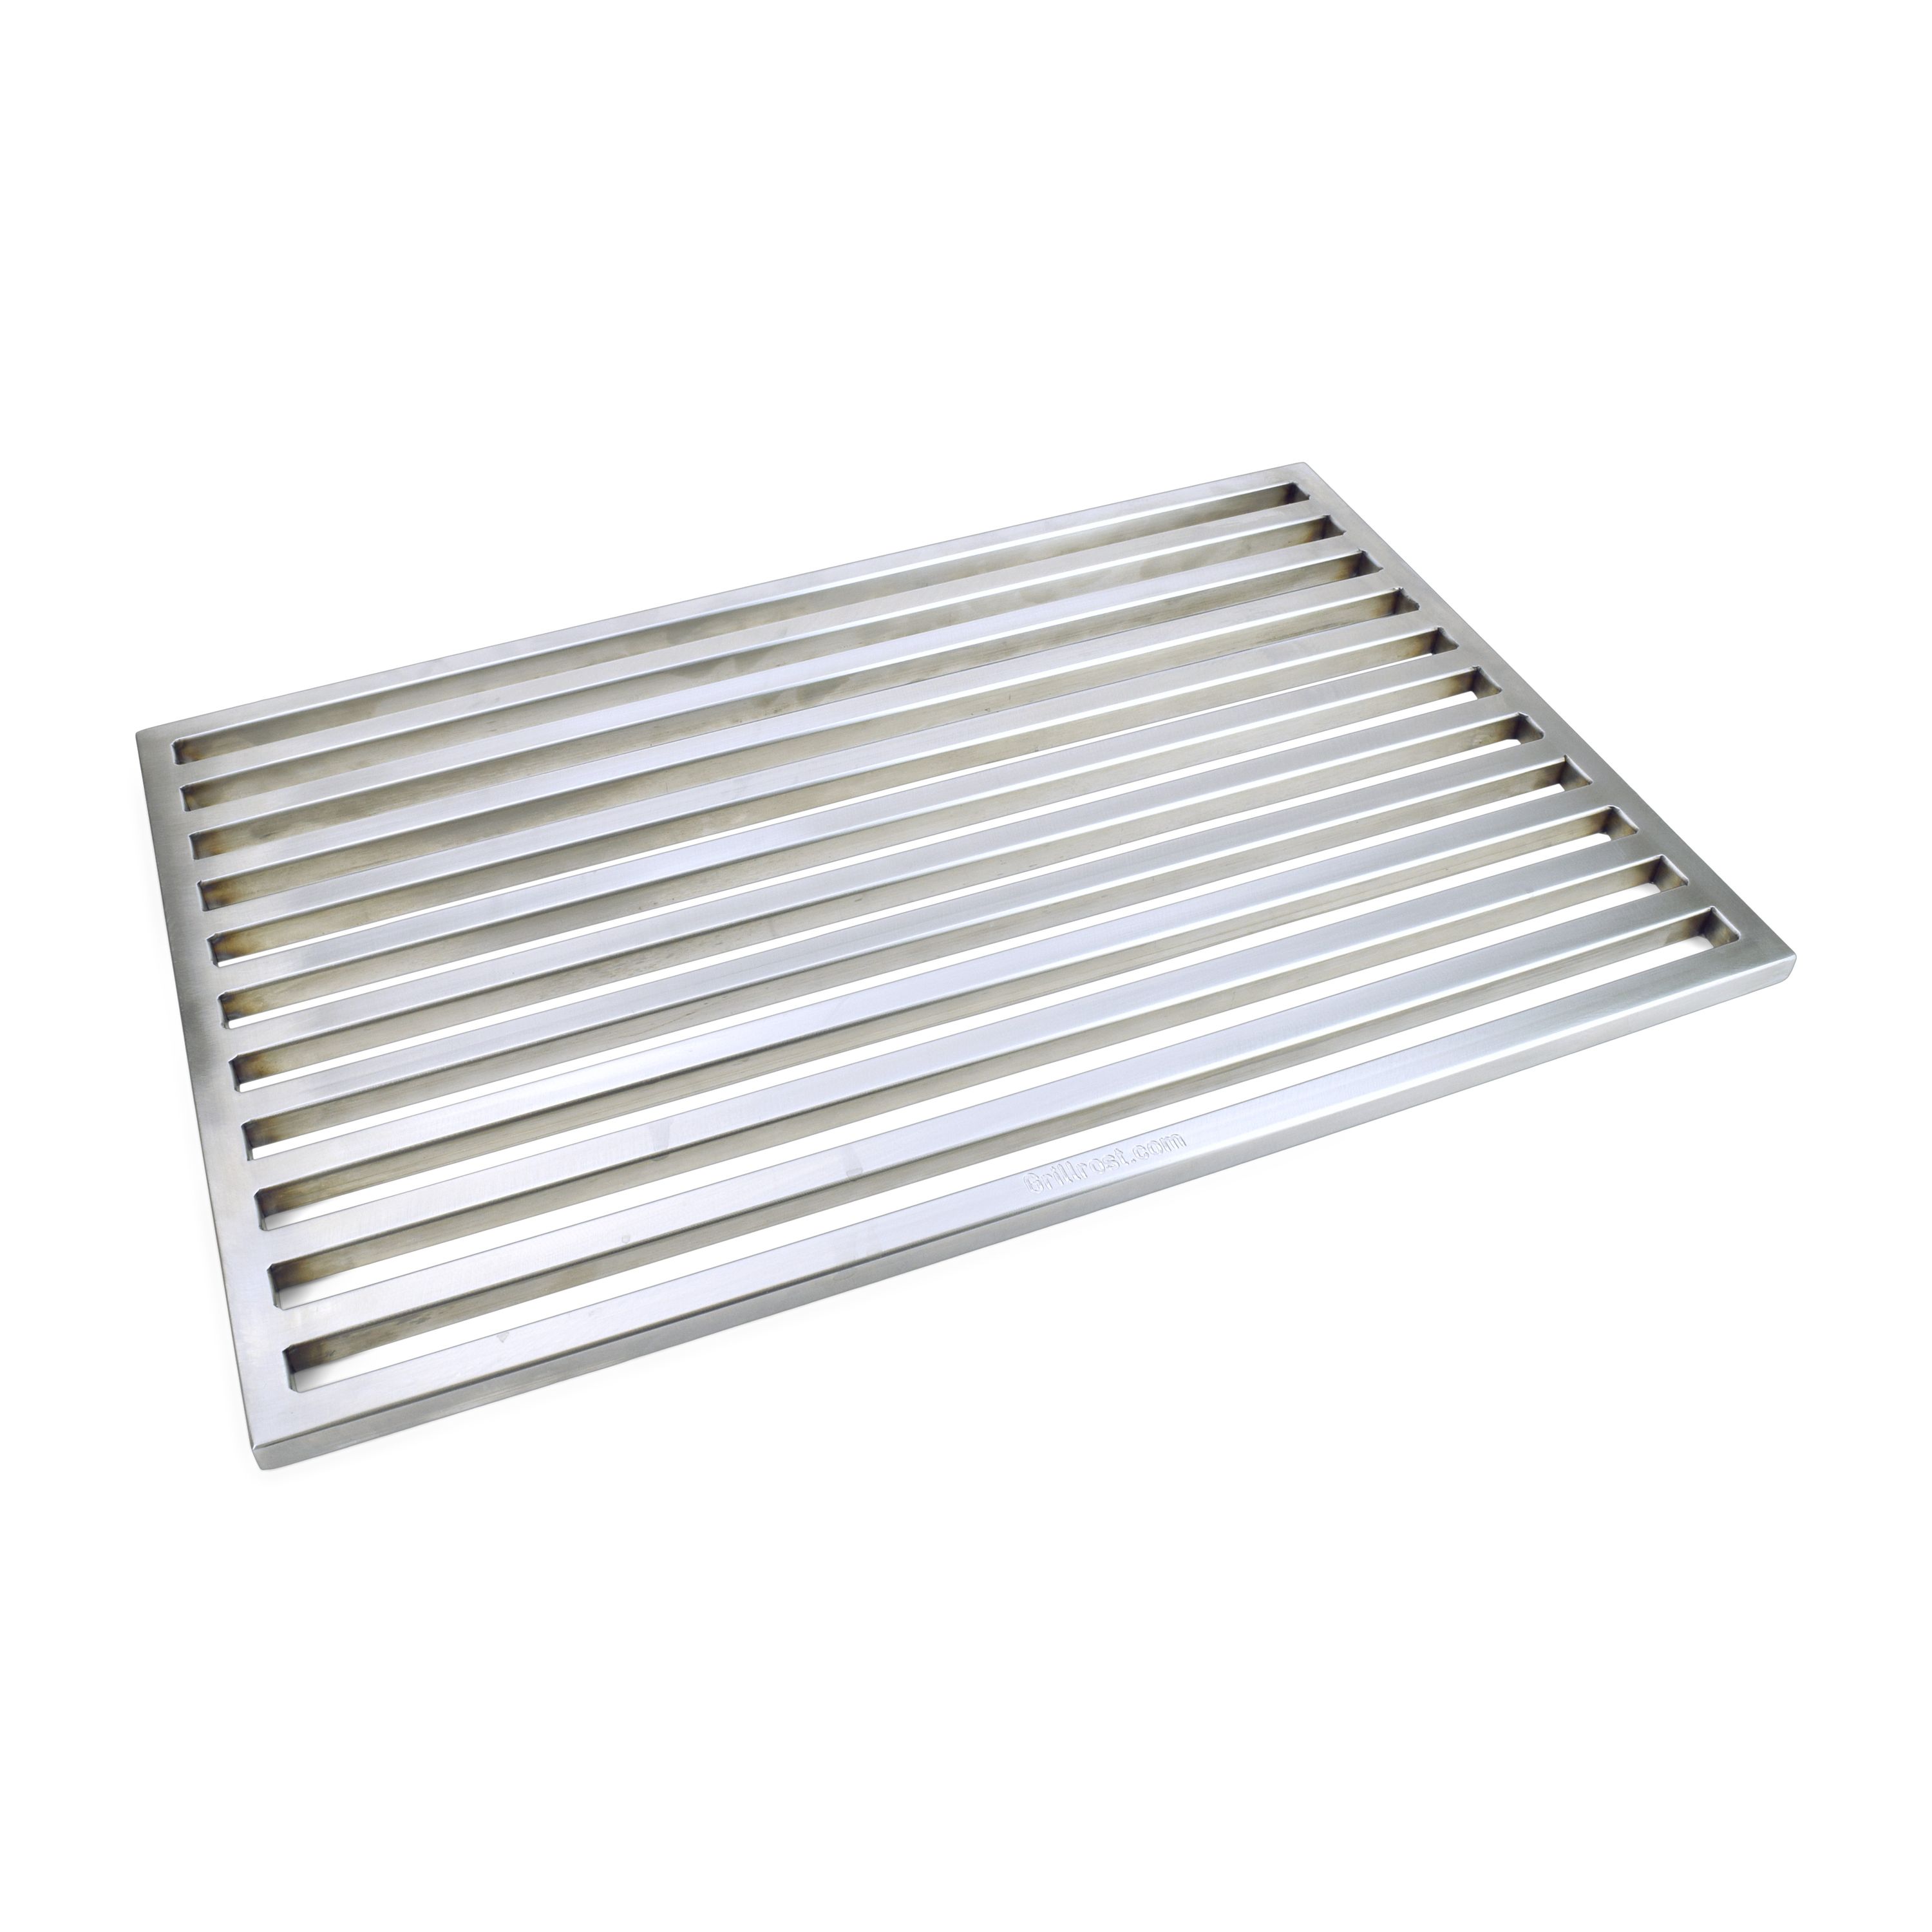 Barbecue grill made to measure ECKIG Model SOLID in stainless steel